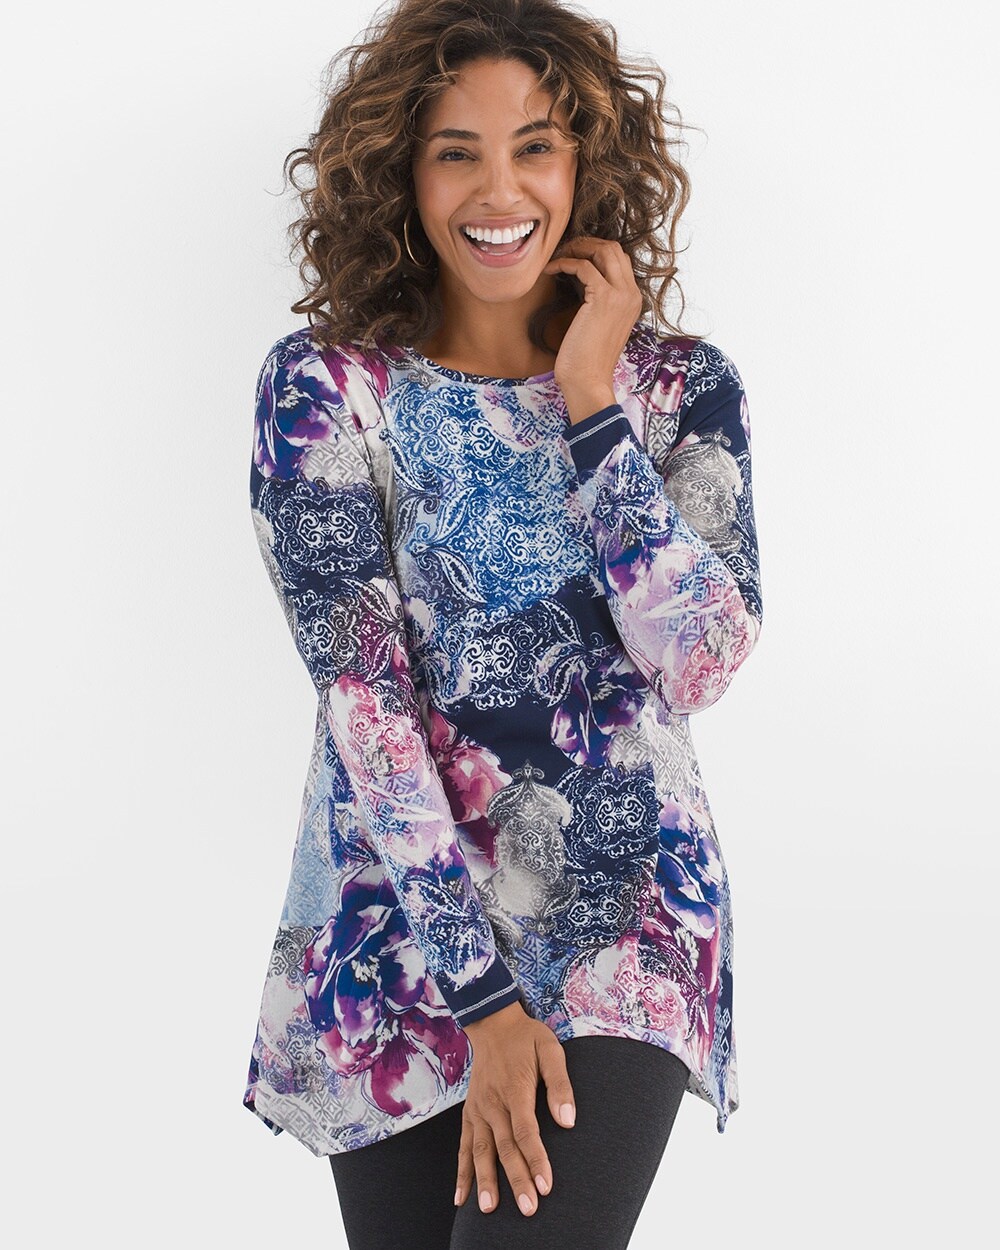 Zenergy Cool Floral Tunic